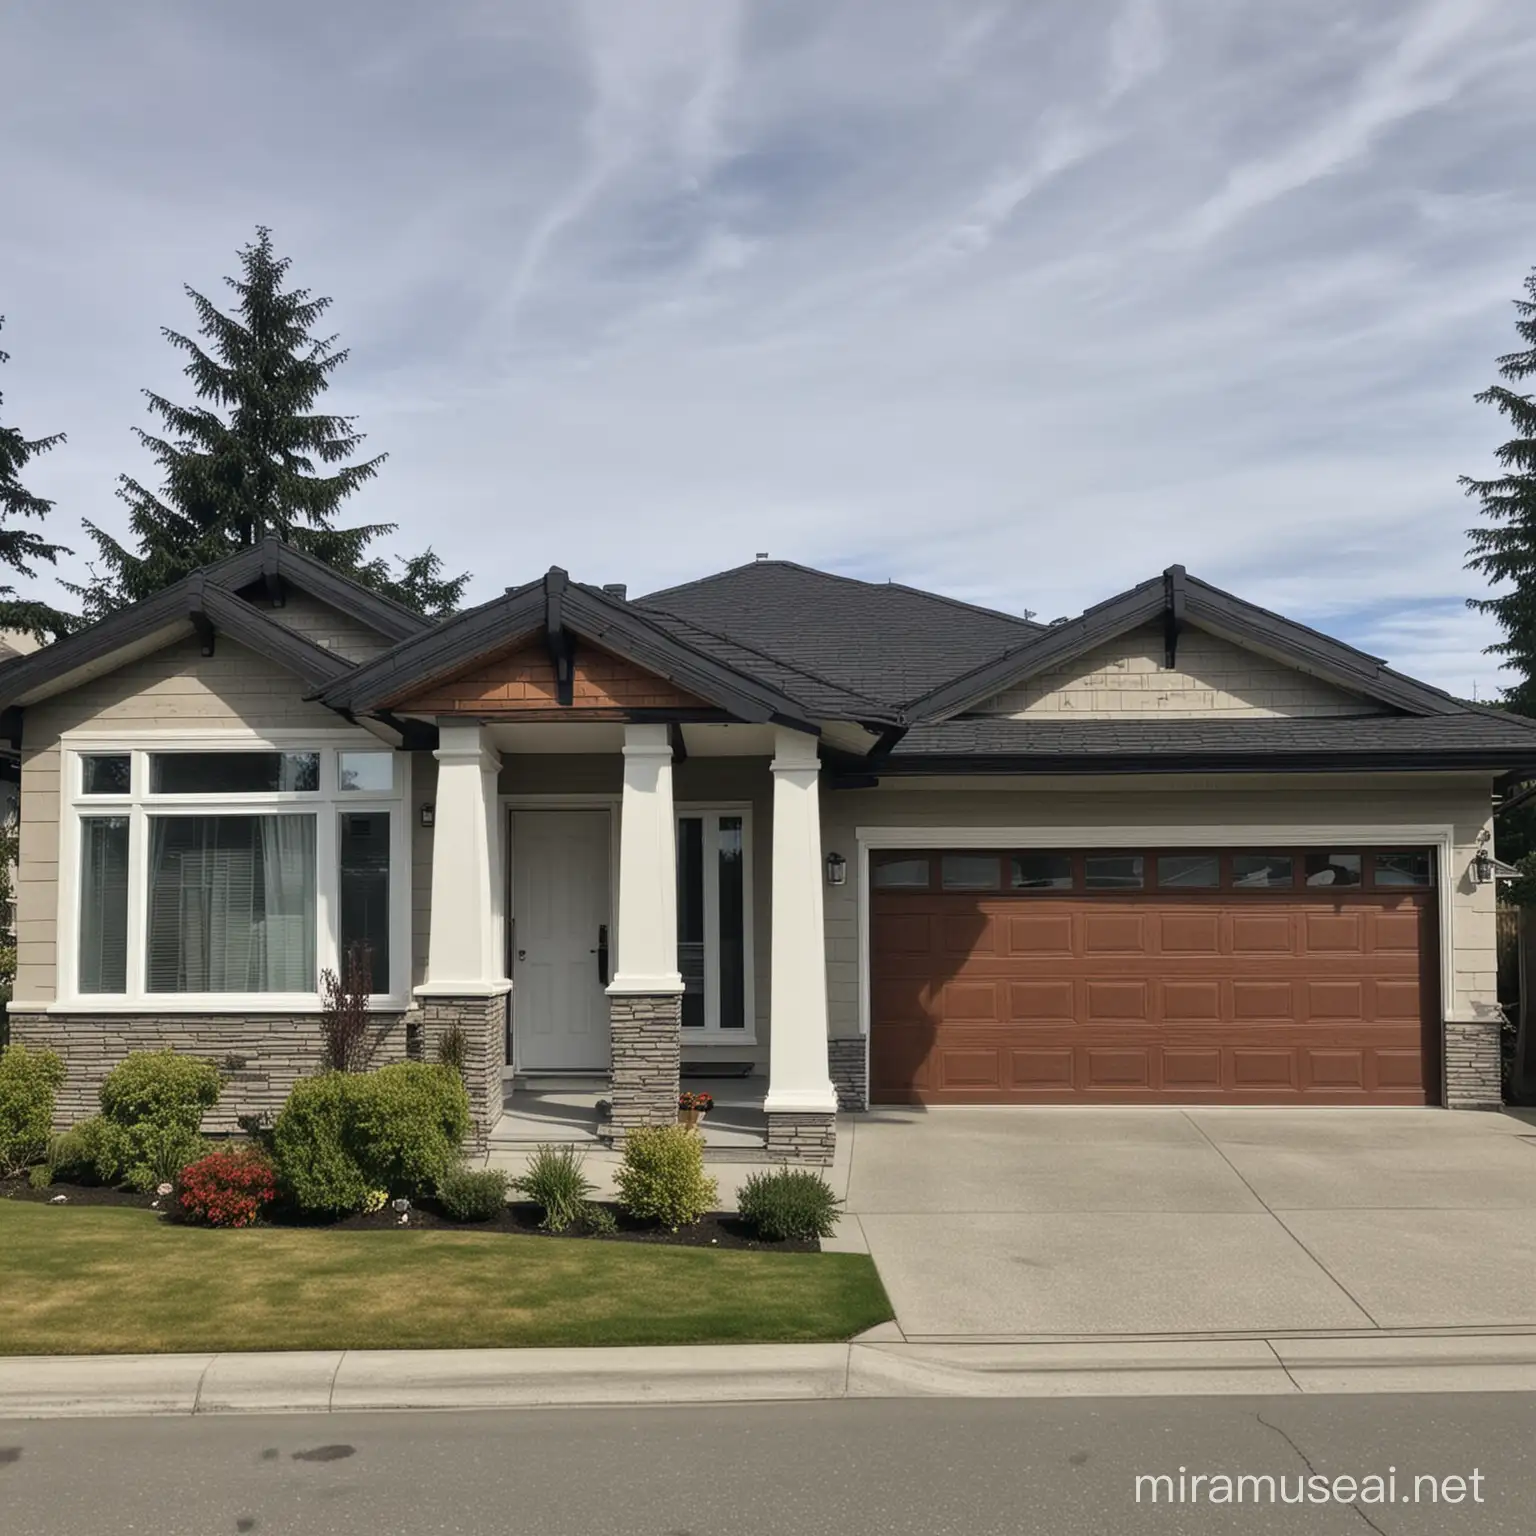 single level home in surrey canada for a facebook ad
